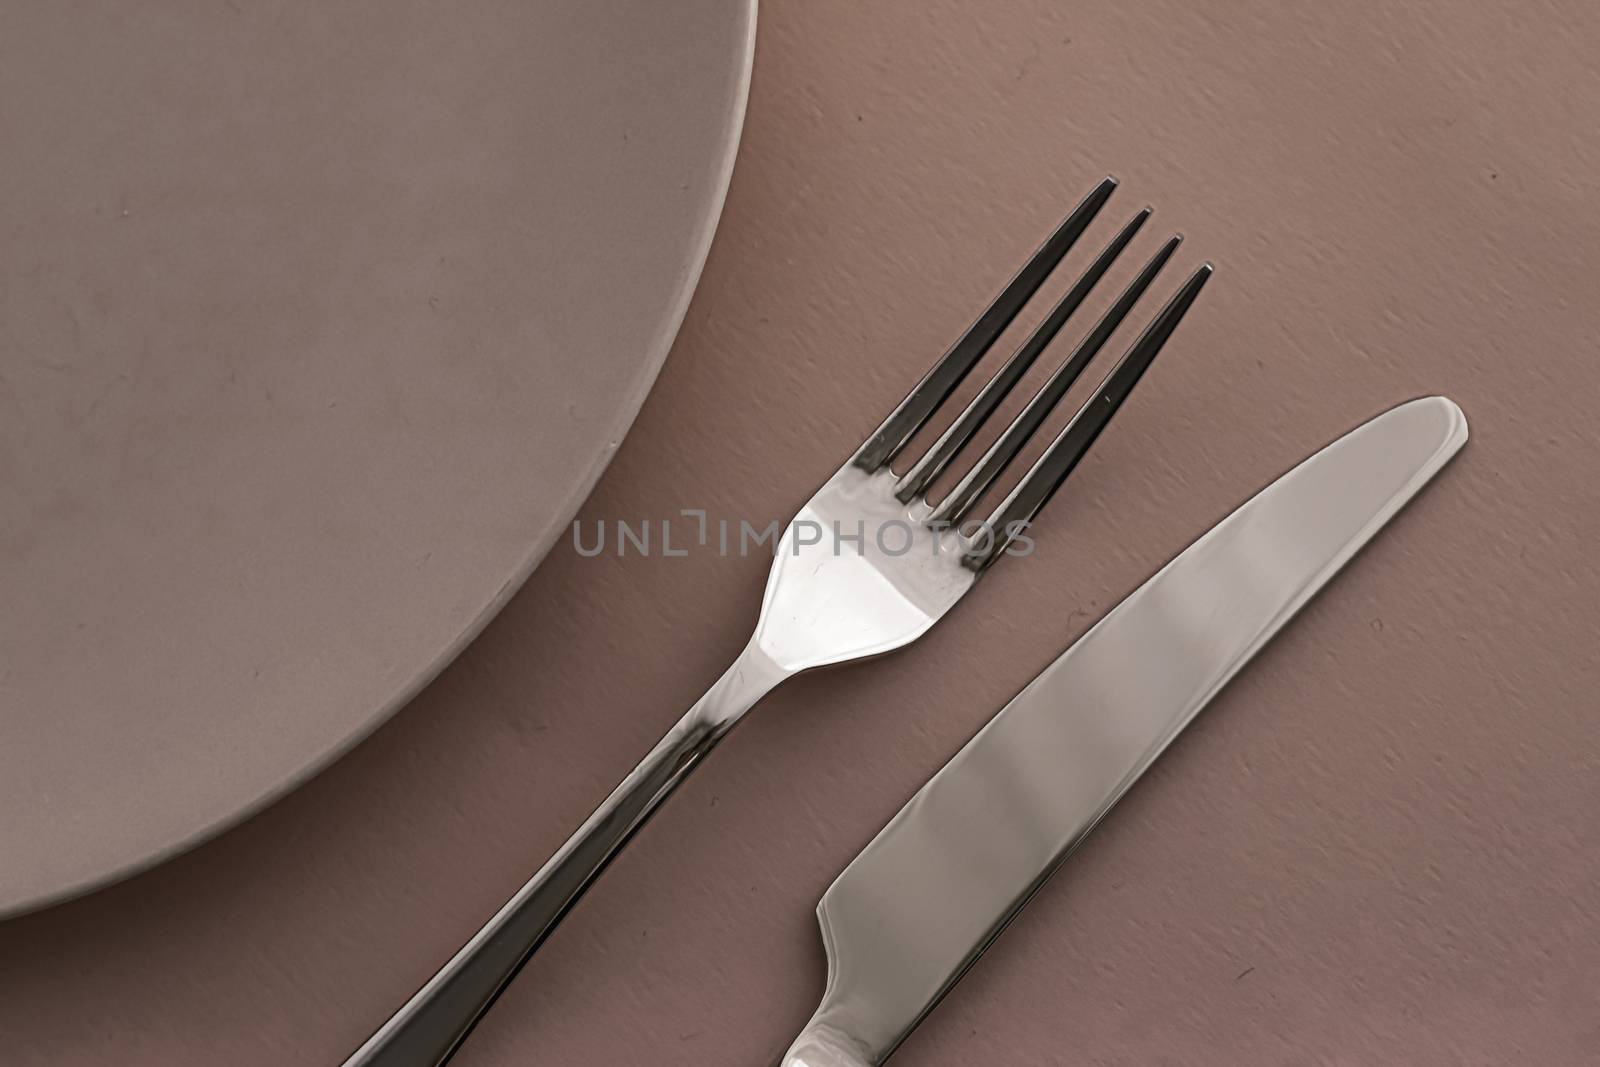 Empty plate and cutlery as mockup set on brown background, top tableware for chef table decor and menu branding design